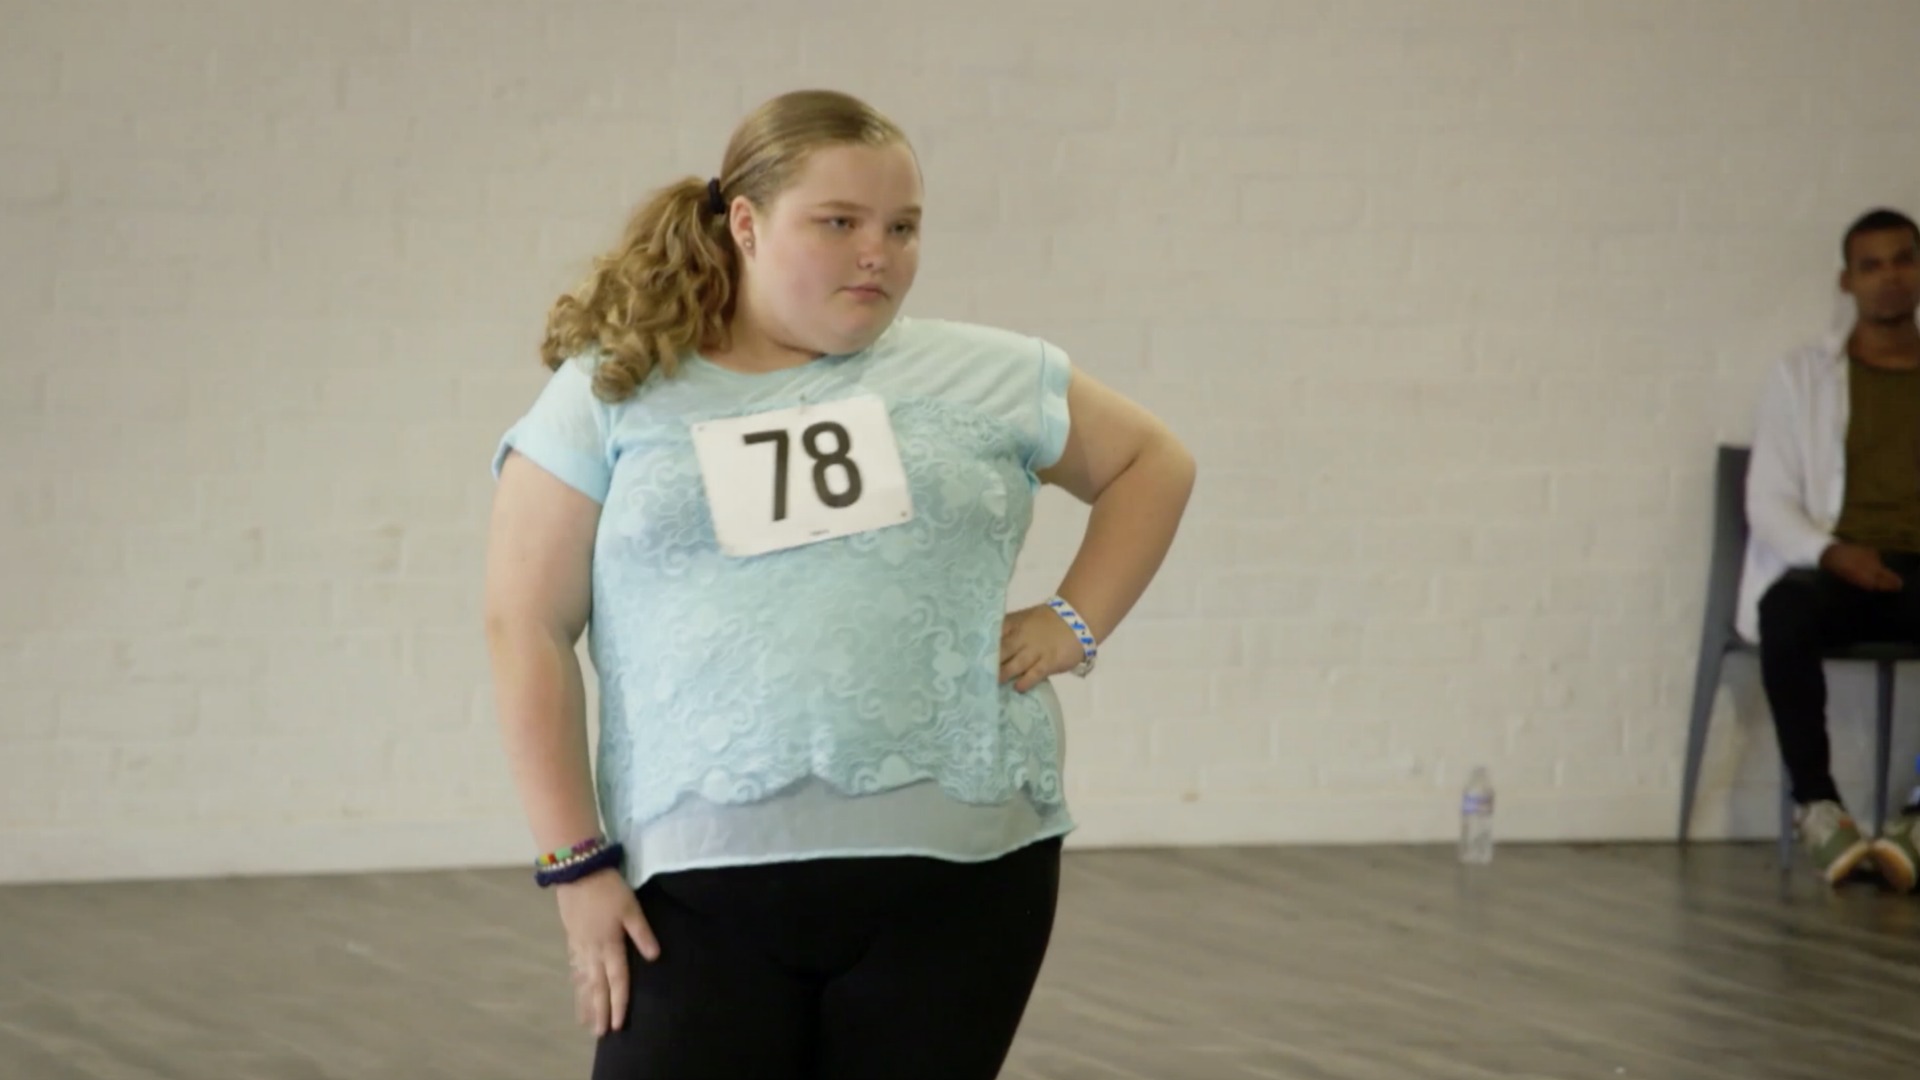 Watch Alana's Big Fashion Show Audition! | Mama June: From Not to Hot Video Extras